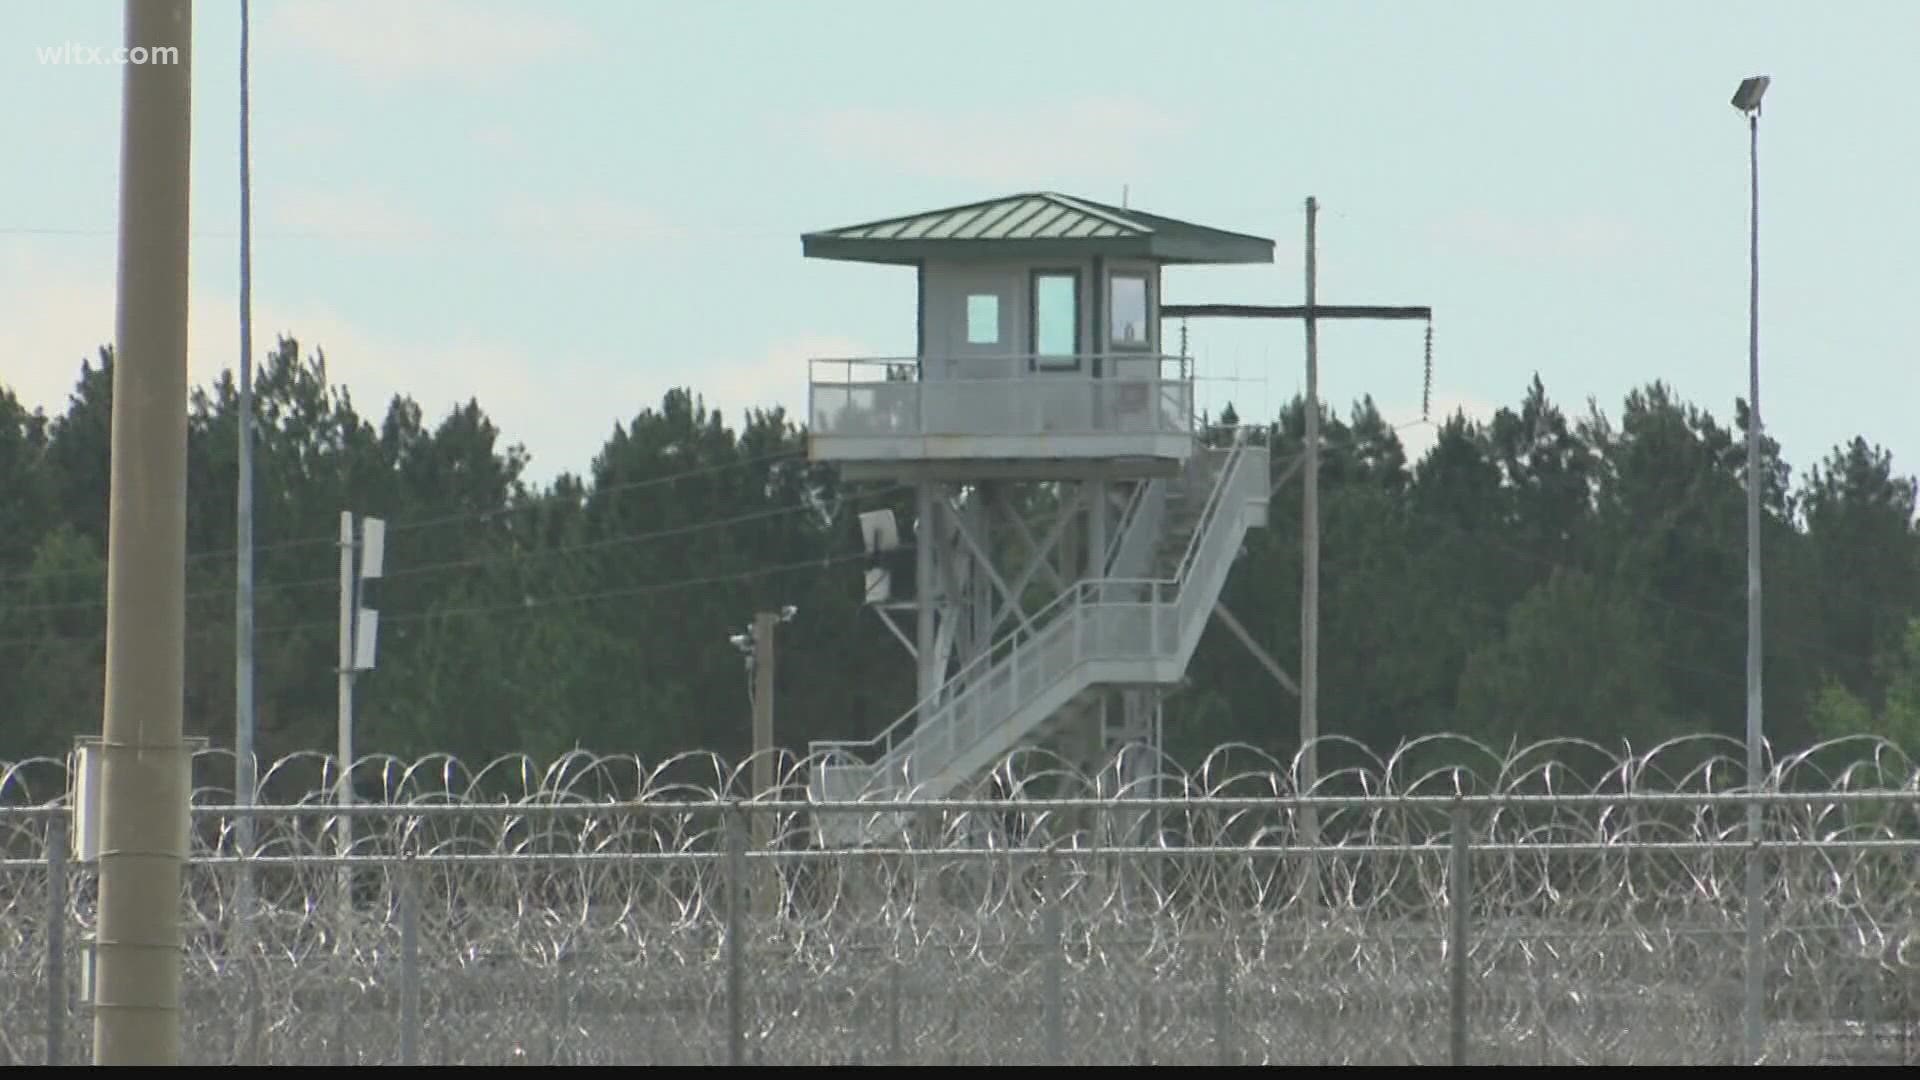 South Carolina has scheduled its first execution after corrections officials finished updating the death chamber to prepare for executions by firing squad.